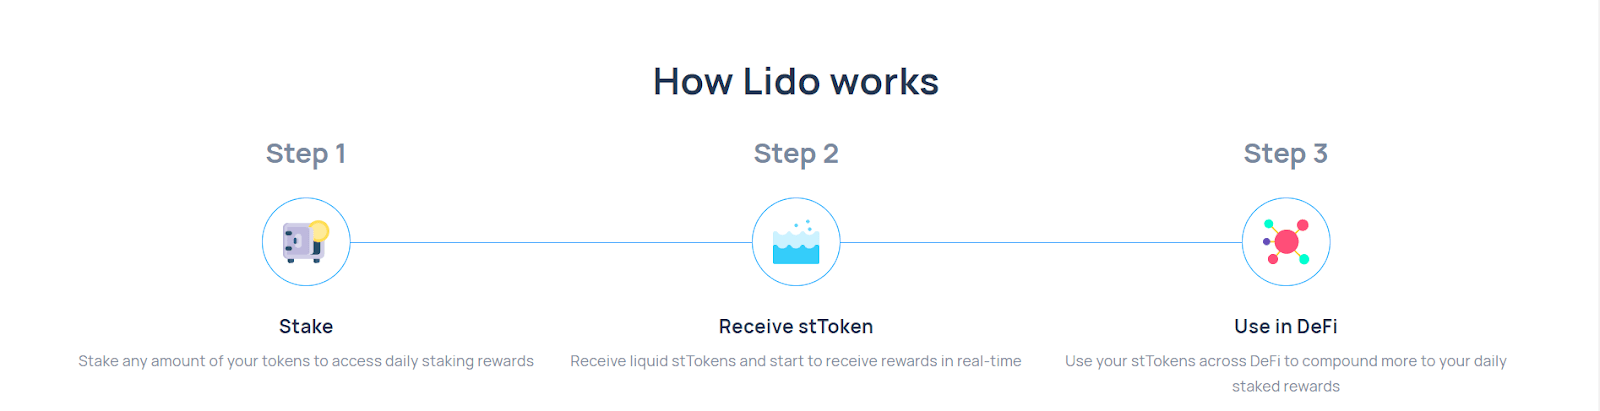 Illustrating the three steps to how Lido Works. Stake, receive stToken, and use in Defi.